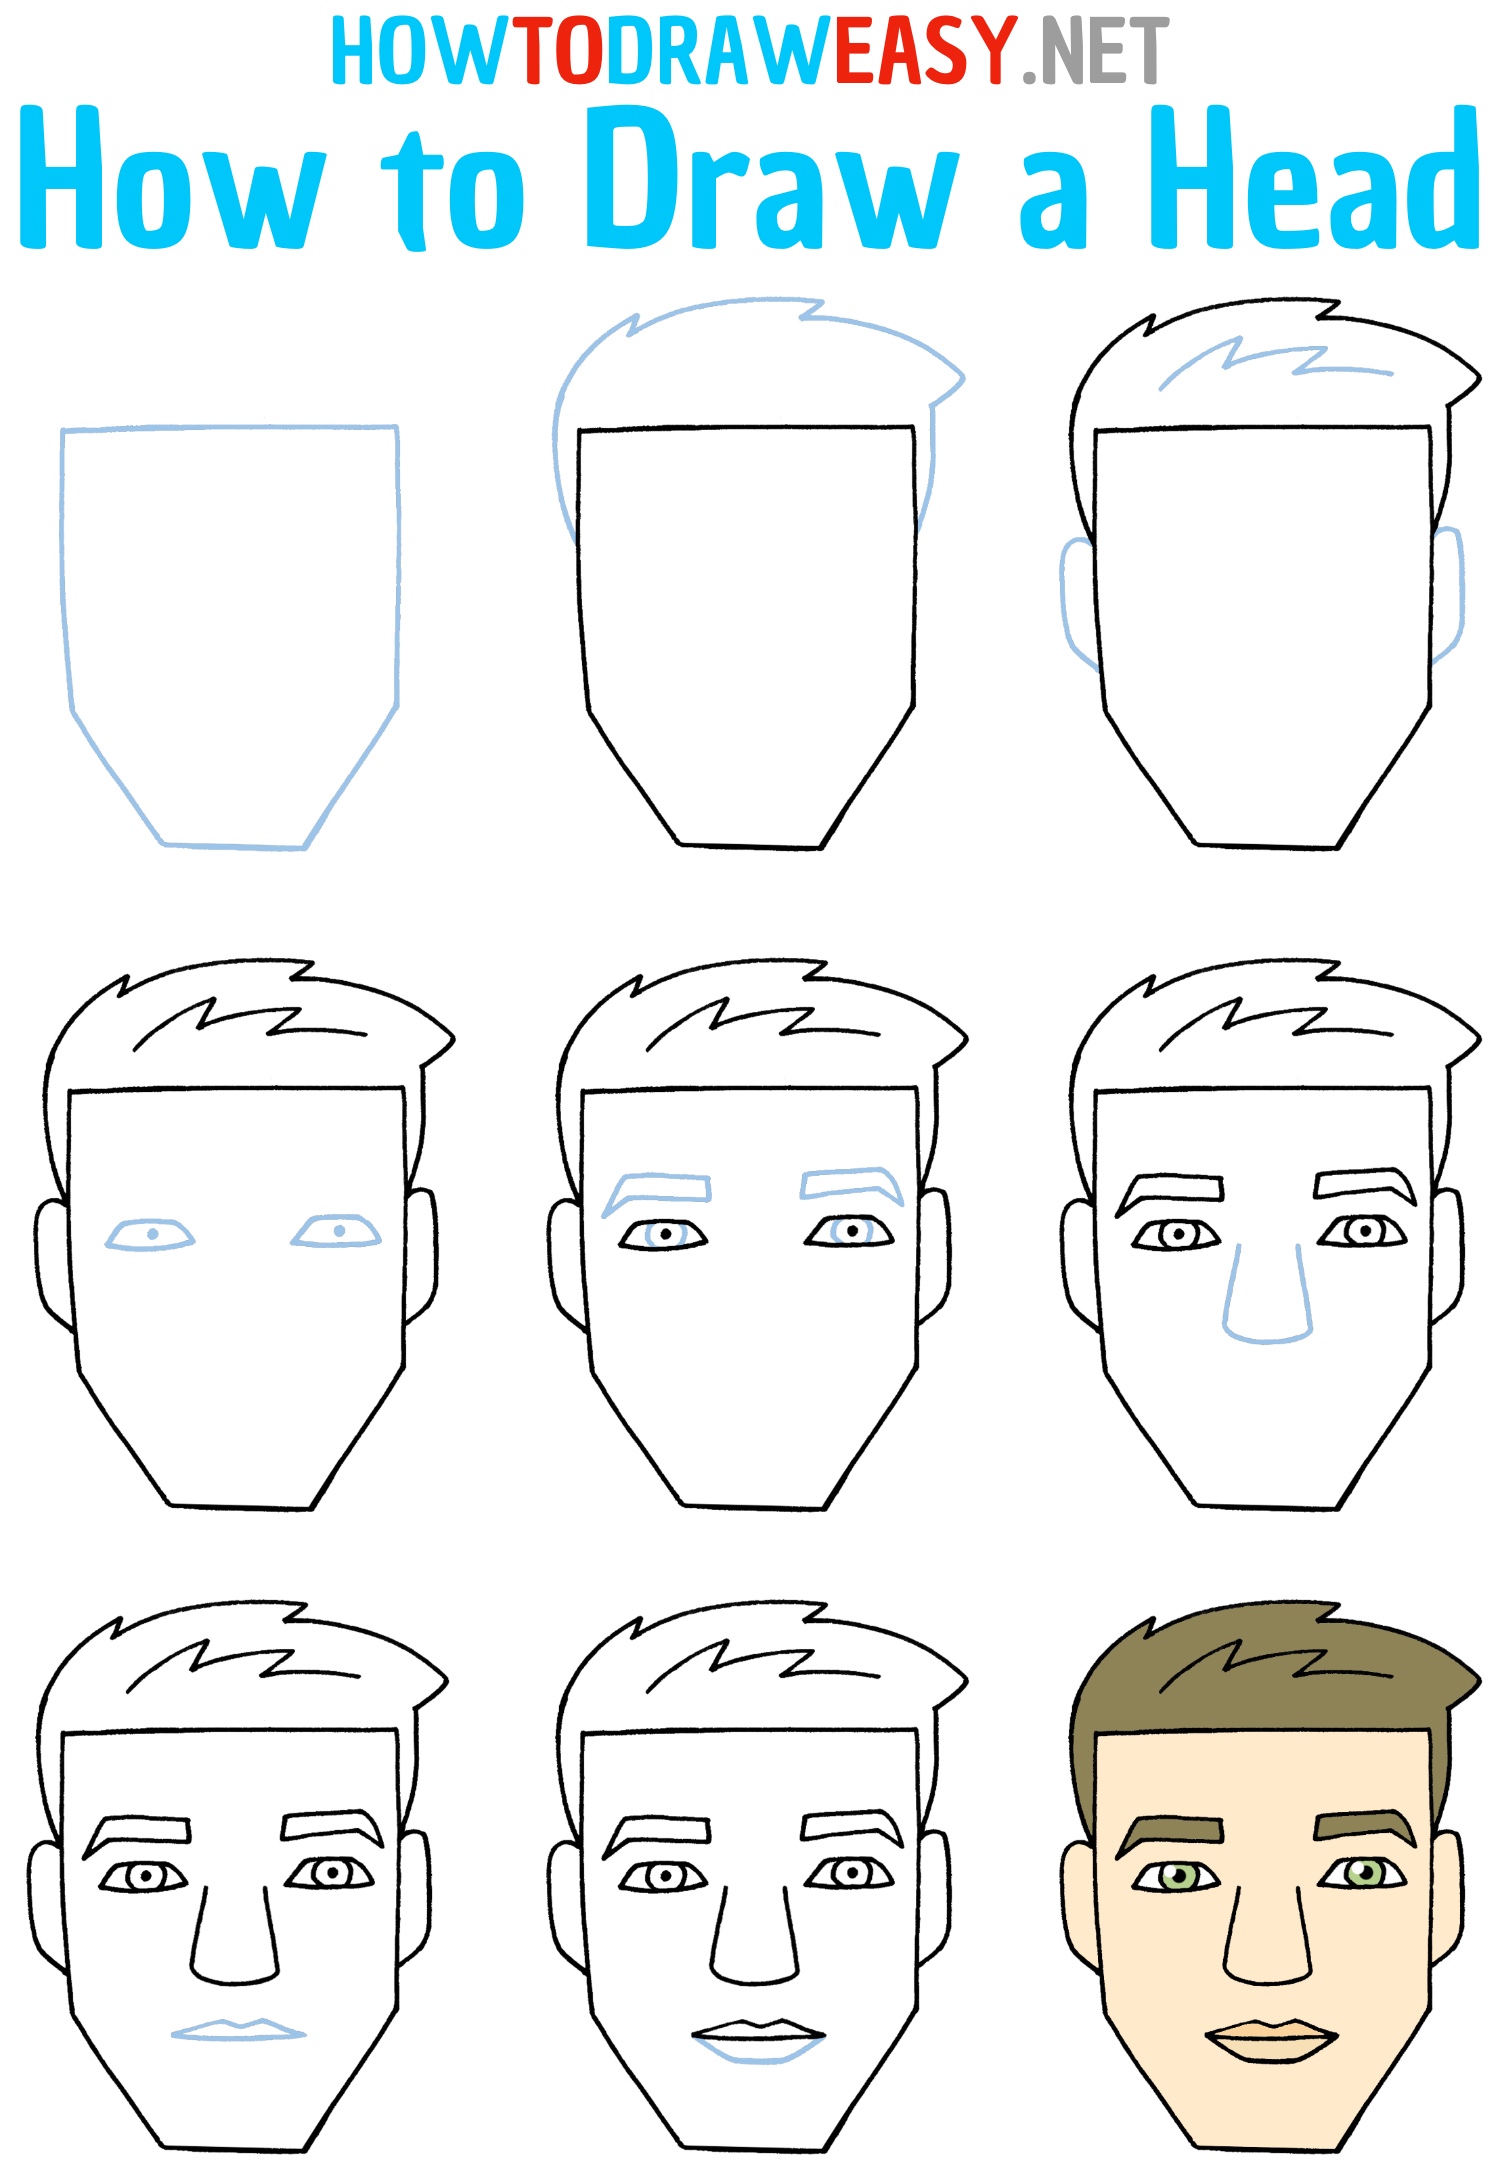 How to Draw a Head Step by Step